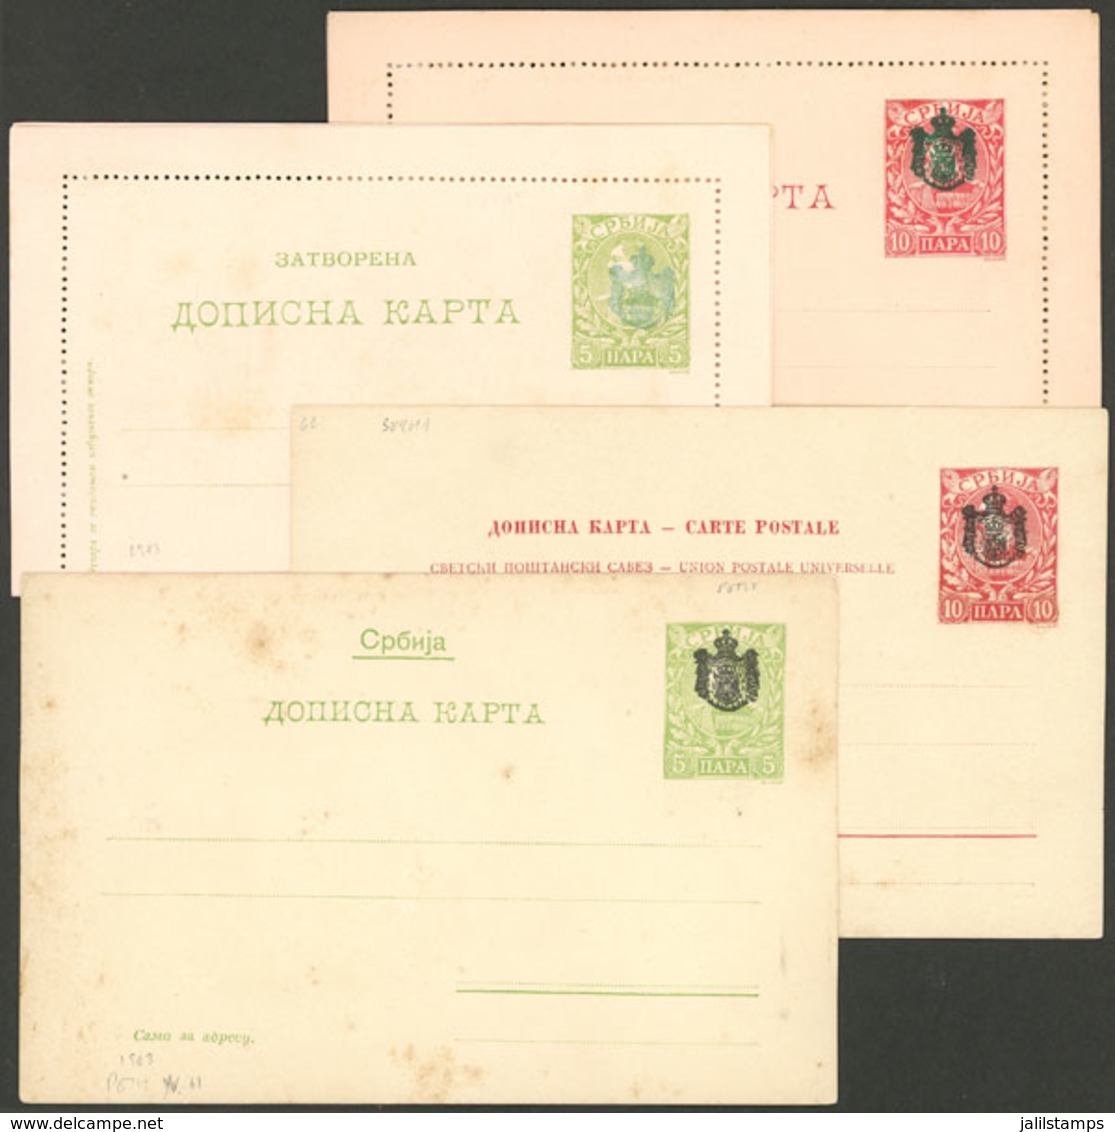 SERBIA: 4 Old Postal Stationeries Overprinted With Coat Of Arms, Interesting! - Servië